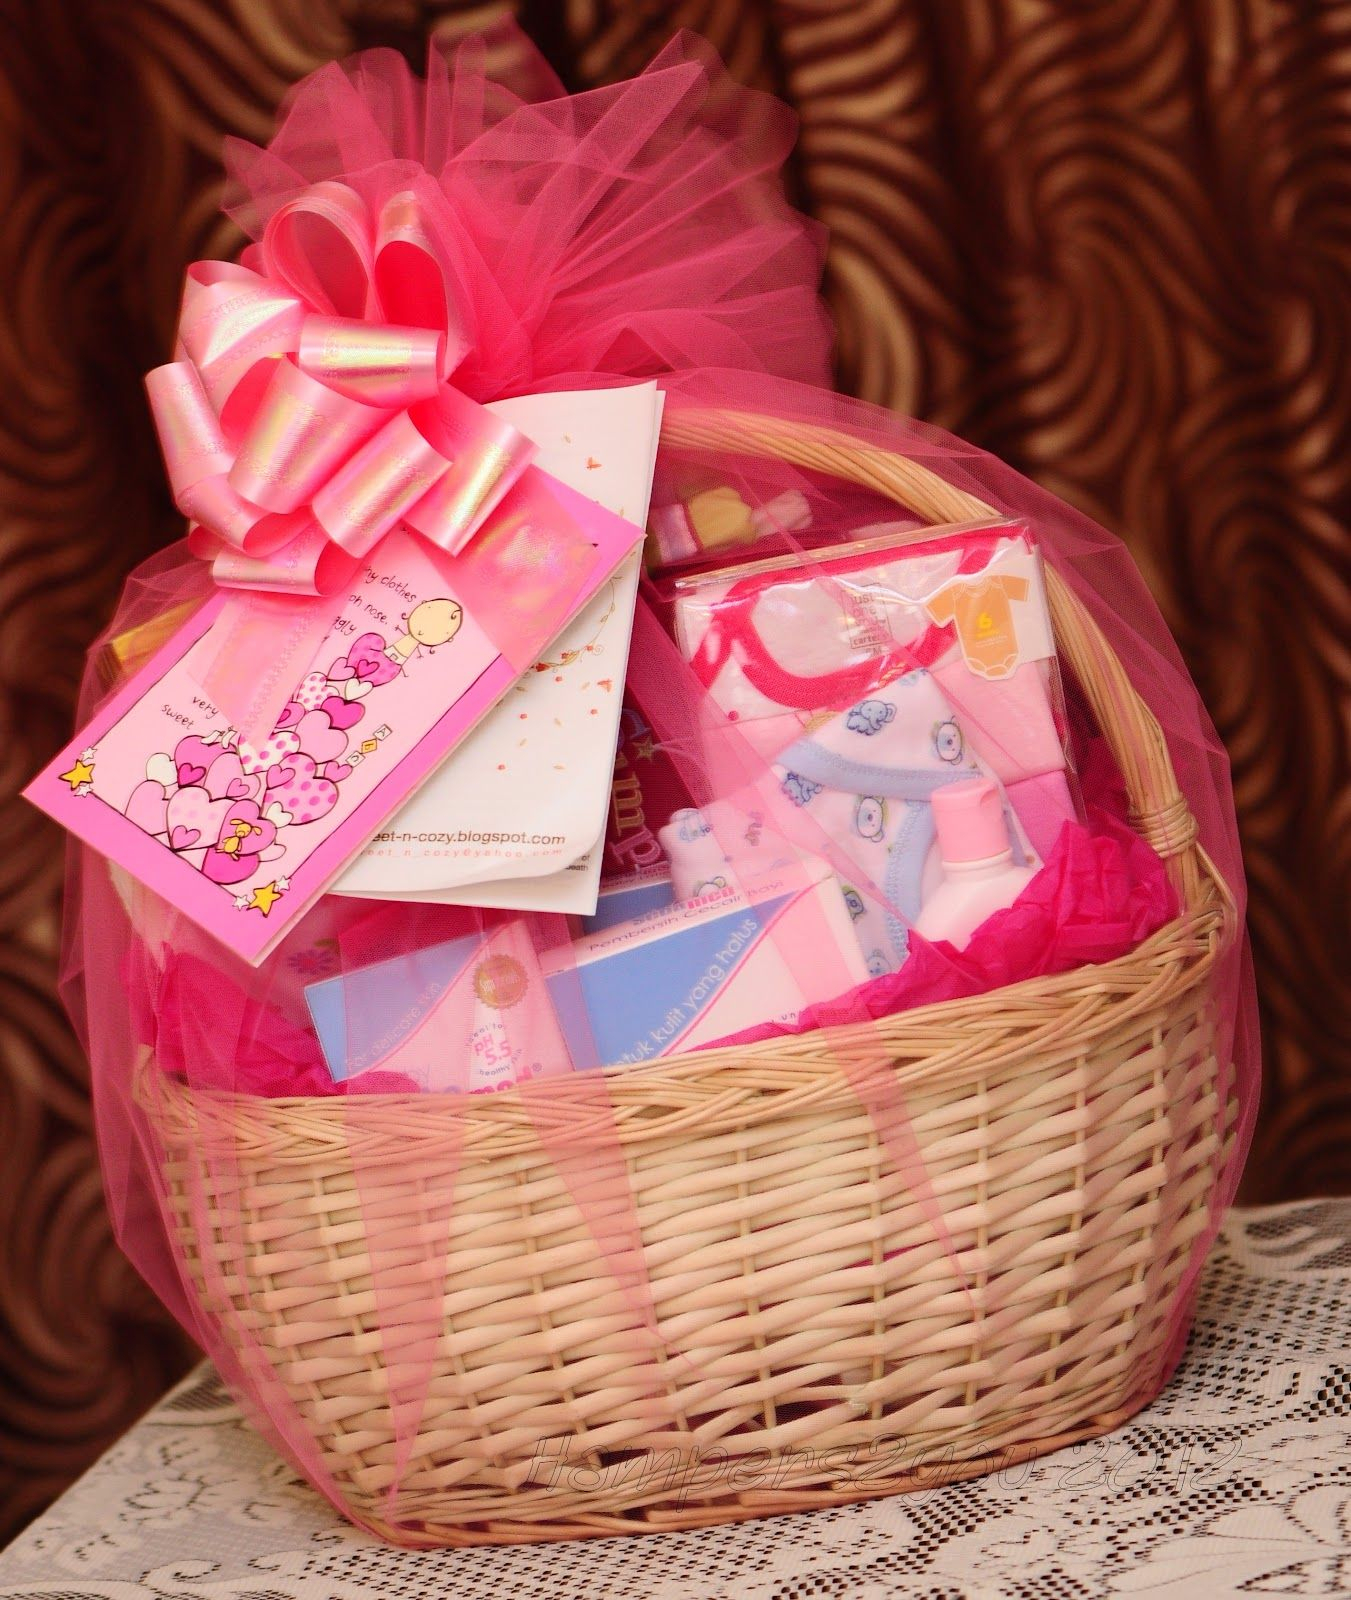 10 Unique New Born Baby Gift Ideas baby gift baskets hampers2you baby gift baskets for newborn girl 1 2024